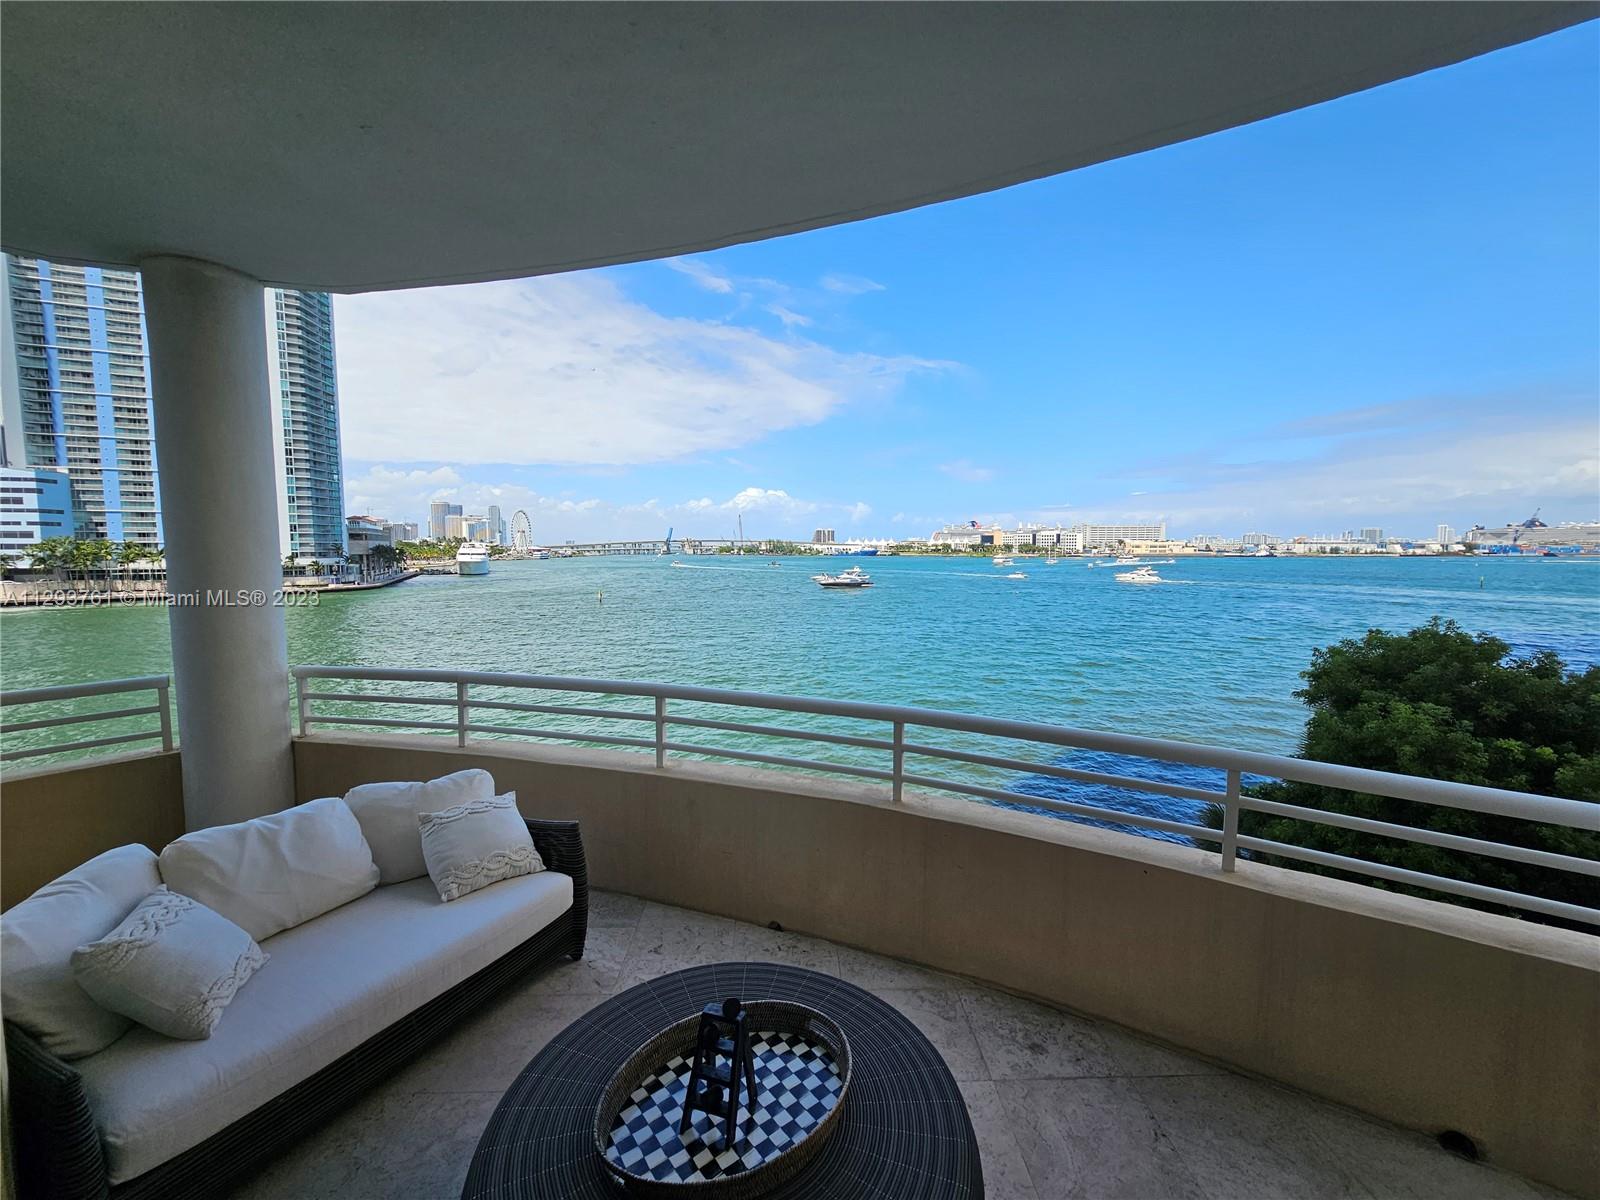 Unique condo in One Tequesta 2 units combined (4th floor) Best views in Brickell Key Island. This 4th floor NE facing gem has the perfect most amazing ocean views on the market, including to the Miami River, Biscayne Bay & the Downtown Miami skyline (adorable night & day views 4th floor cruise ship feel) Private end of hallway unit with 4 BR's (2 masters with balcony & walk-in closets) all  bedrooms have a full bathroom, plus there's a half bath for visitors. Large wrap-around balcony to enjoy the magnificent views while entertaining guests. The open, spacious very bright living area connects to a beautiful dining space & gourmet kitchen all with amazing views. storage units, High ceilings, best 2 parking spots on 4th floor. Enjoy a vibrant life steps away by the bay in Downtown Miami.